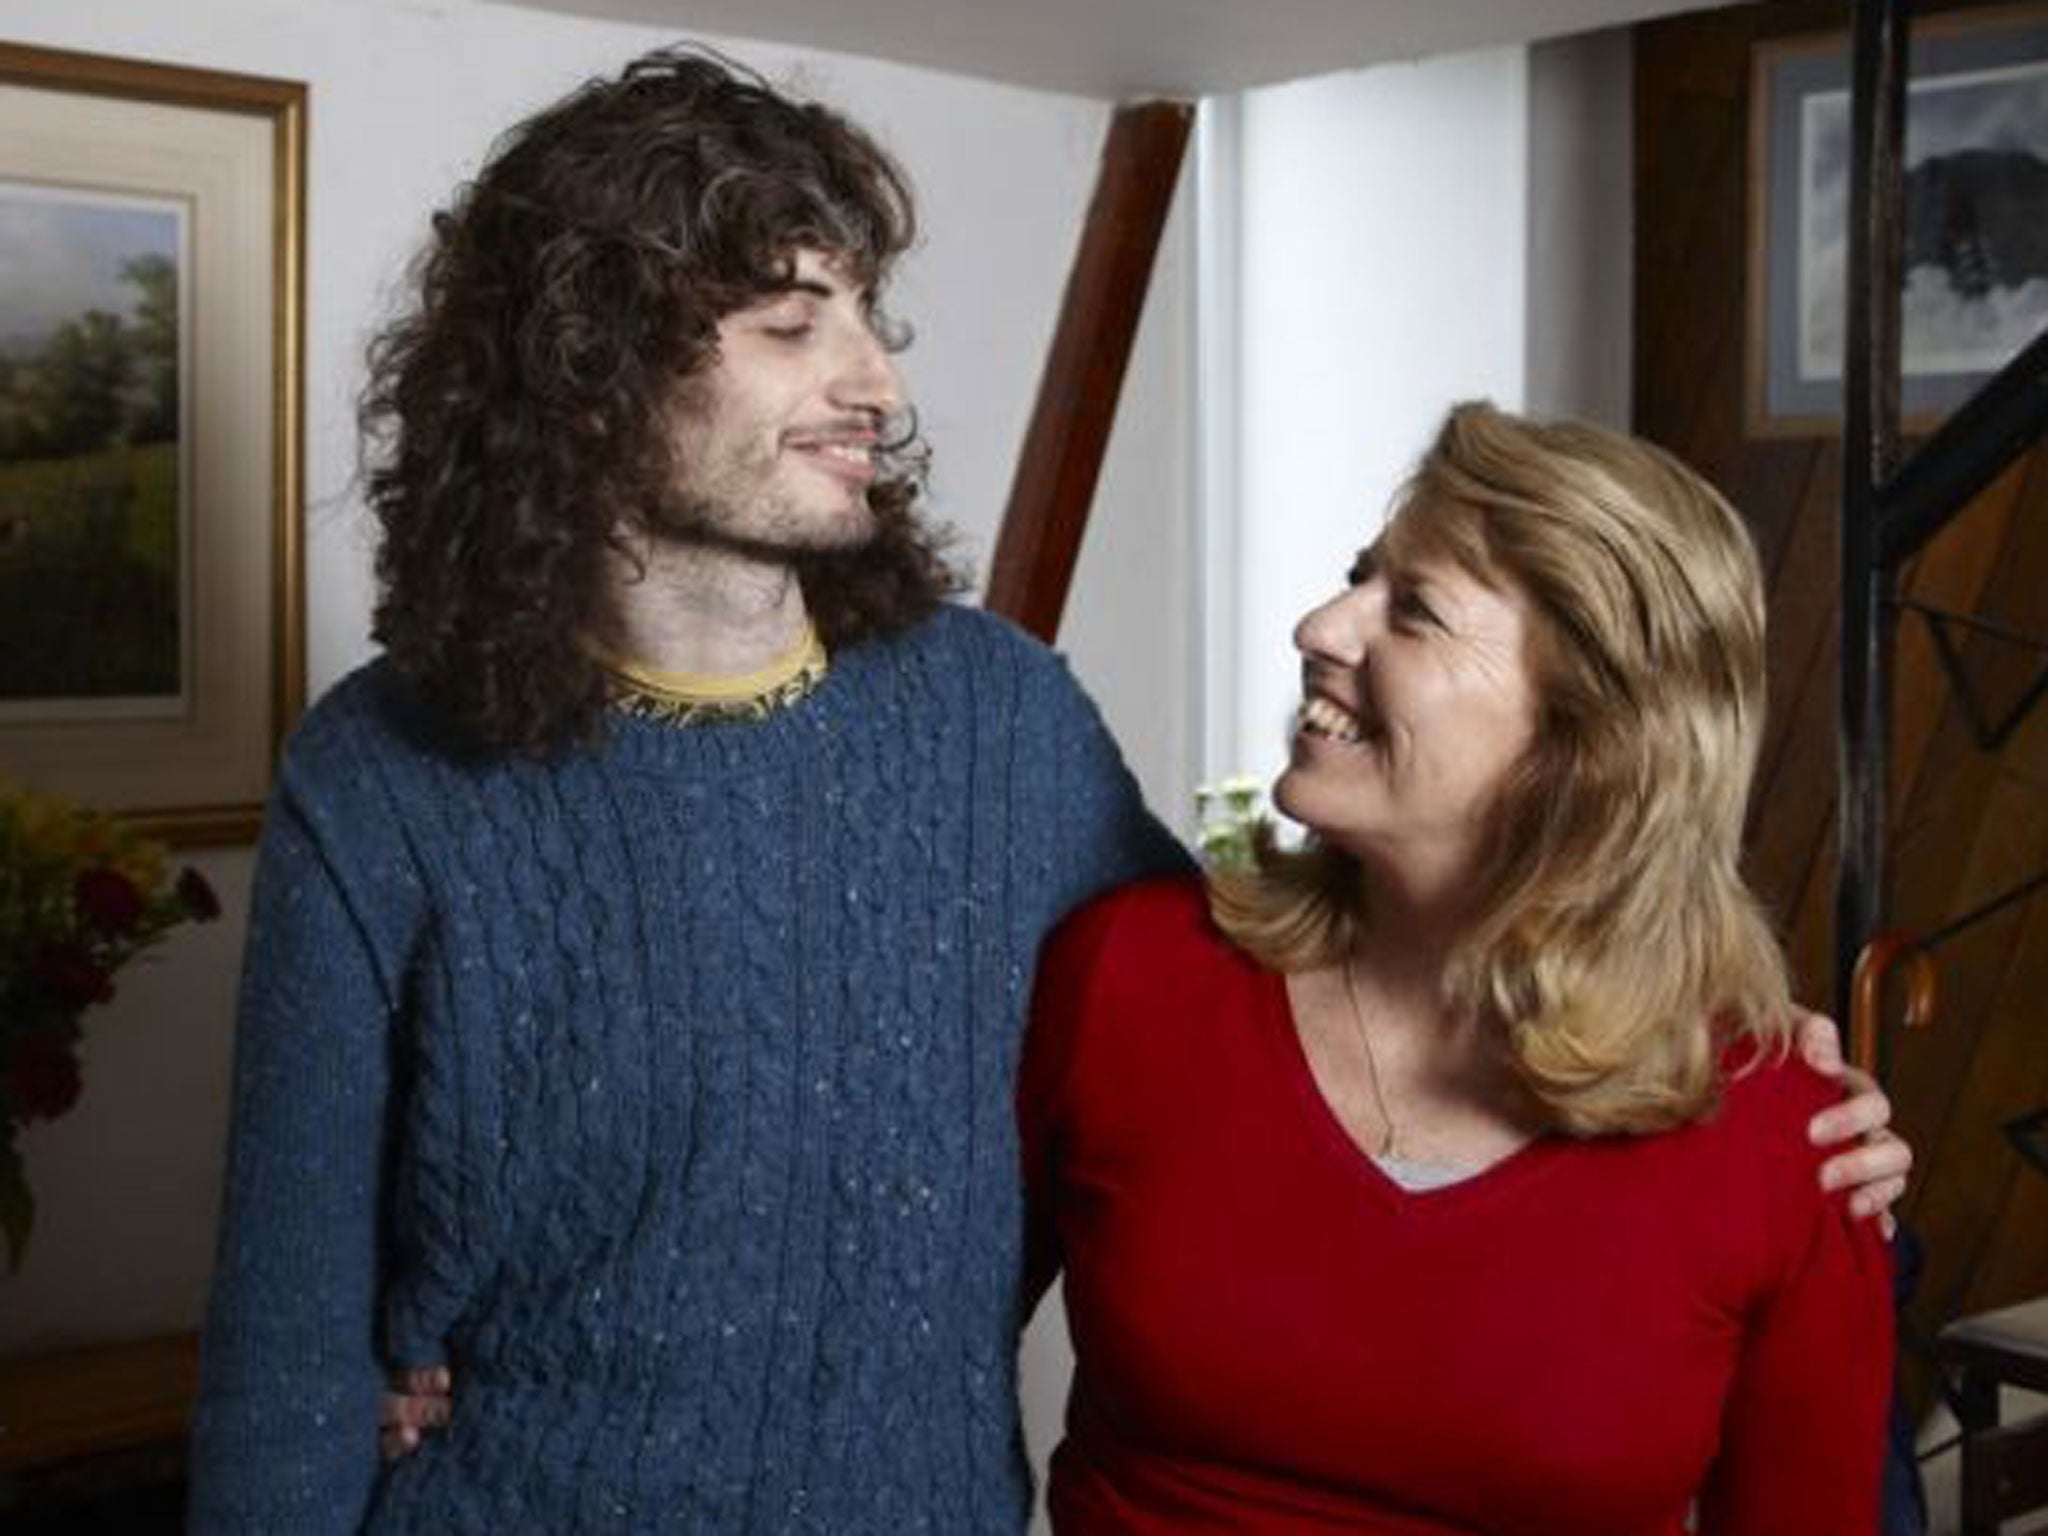 Close knit: James, here with his mother, Penny, was one of the patients featured on Channel 4’s ‘Bedlam’